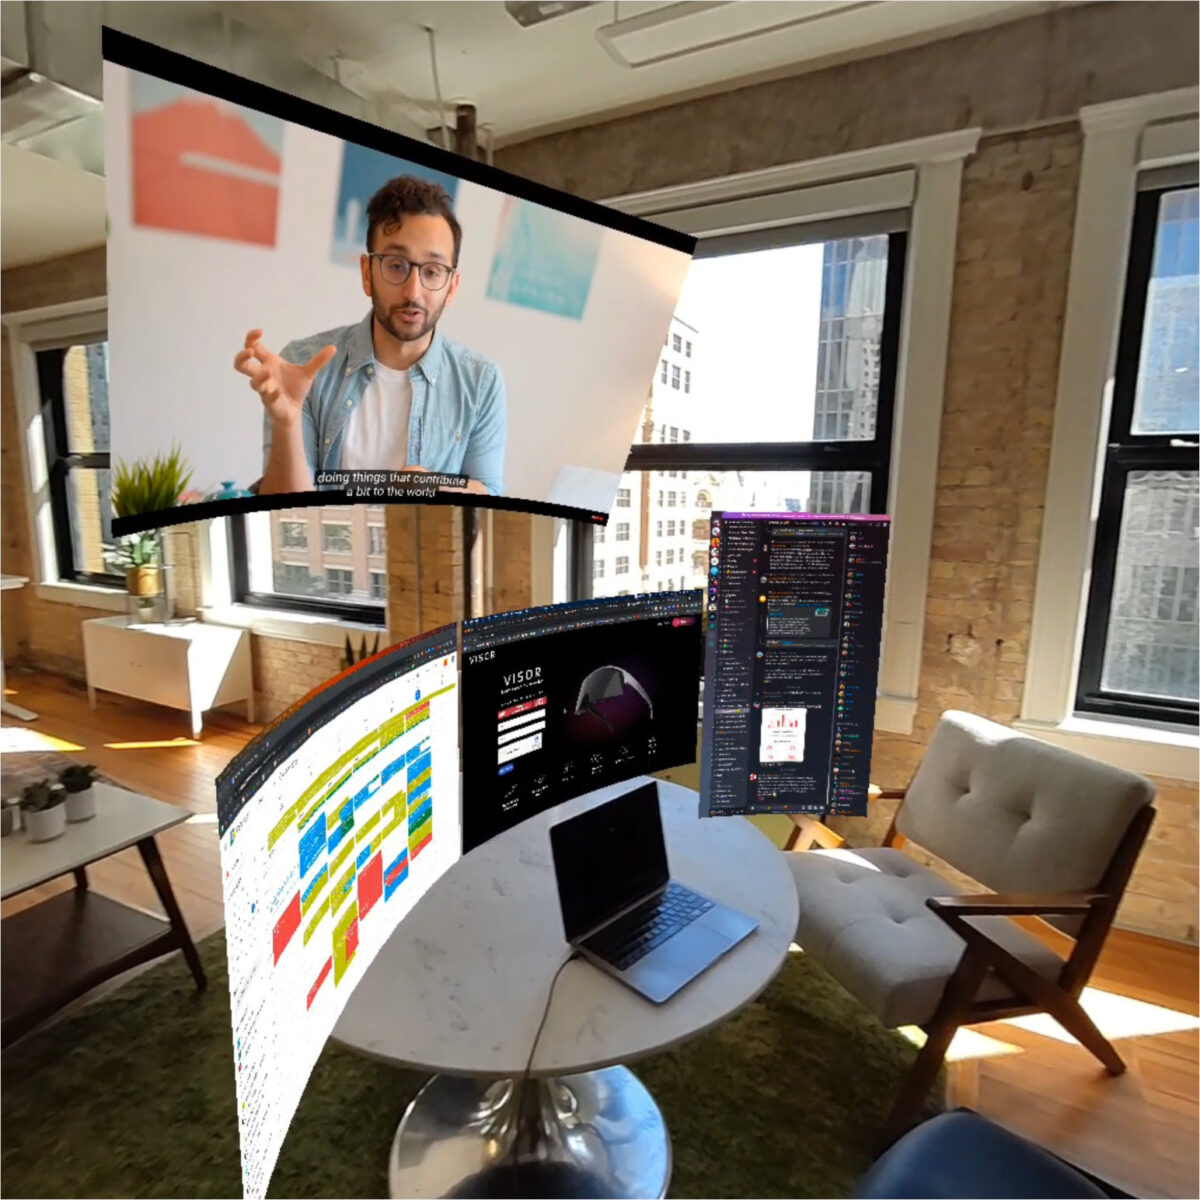 Immersed passthrough view shows multiple virtual screens.